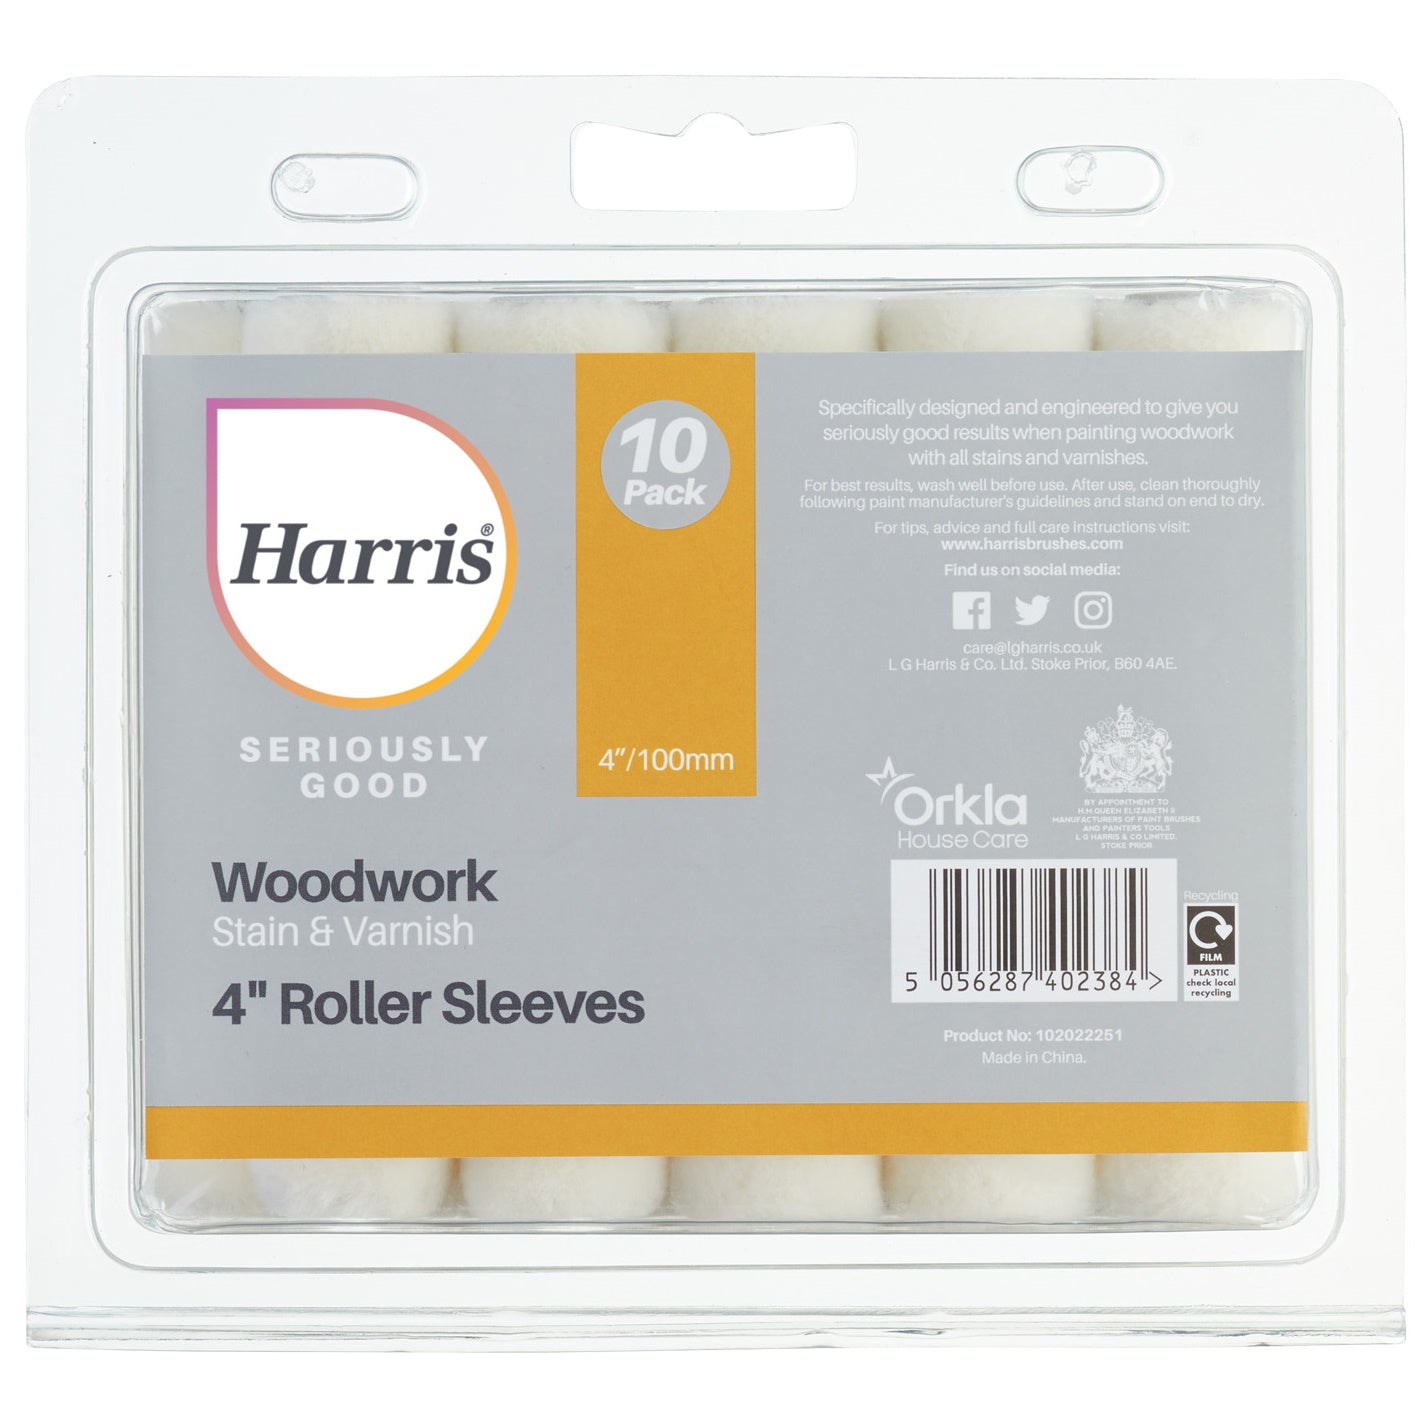 Harris Seriously Good 102022251 Woodwork Stain & Varnish 4" Roller Sleeves Pkt10 - Premium Rollers from HARRIS - Just $8.5! Shop now at W Hurst & Son (IW) Ltd